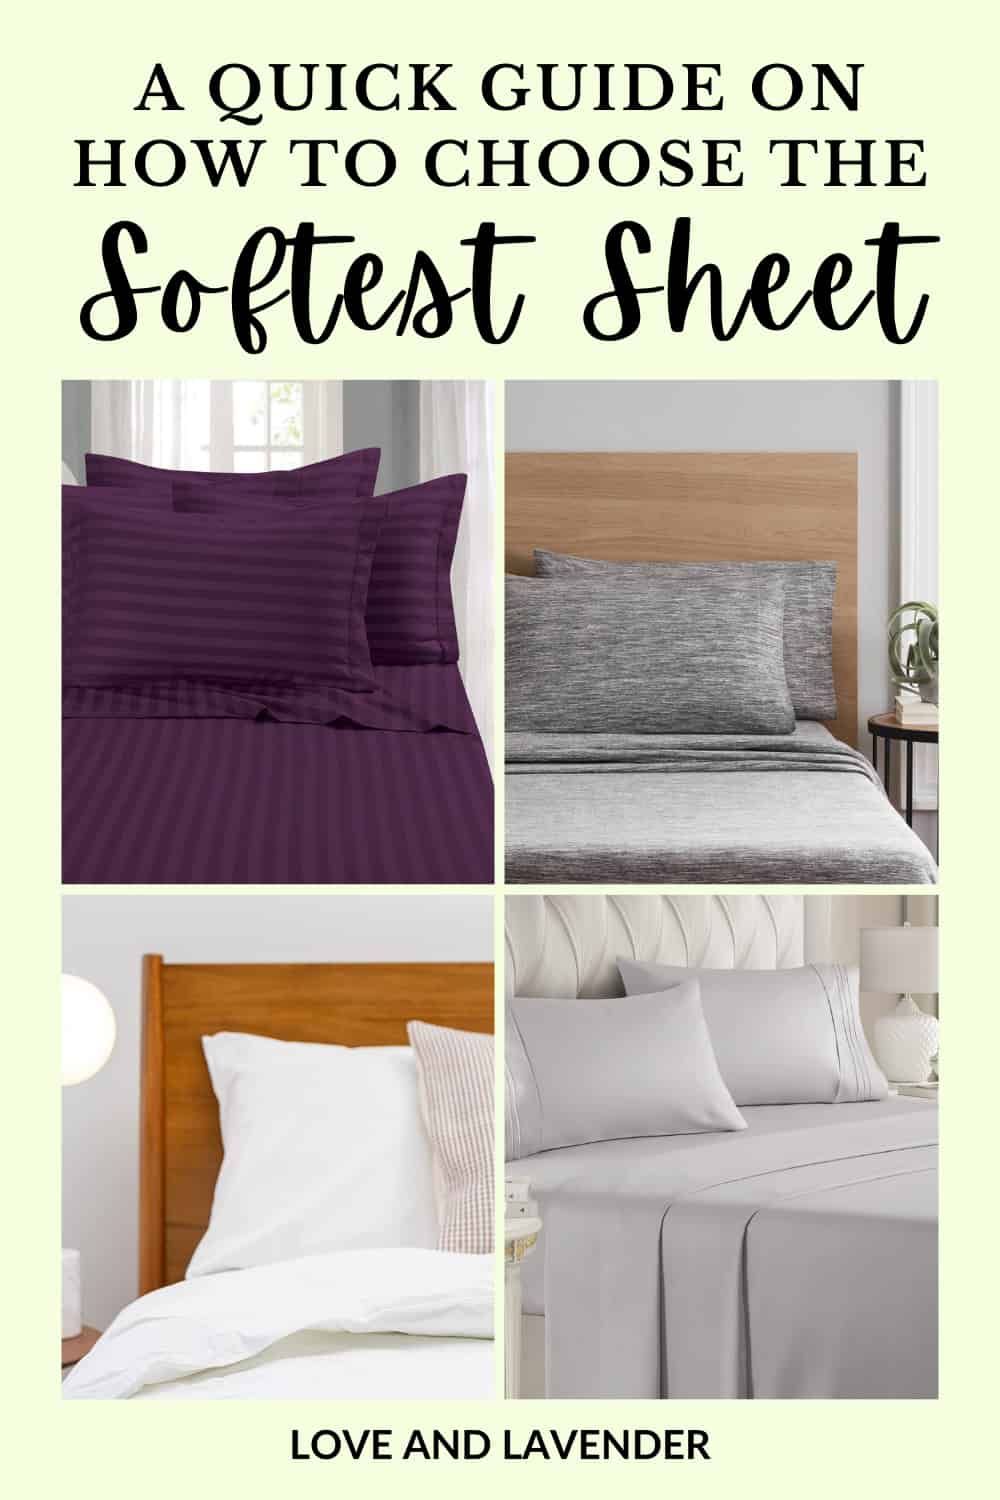 13 of the Softest Sheets For The Best Night's Sleep - Love & Lavender